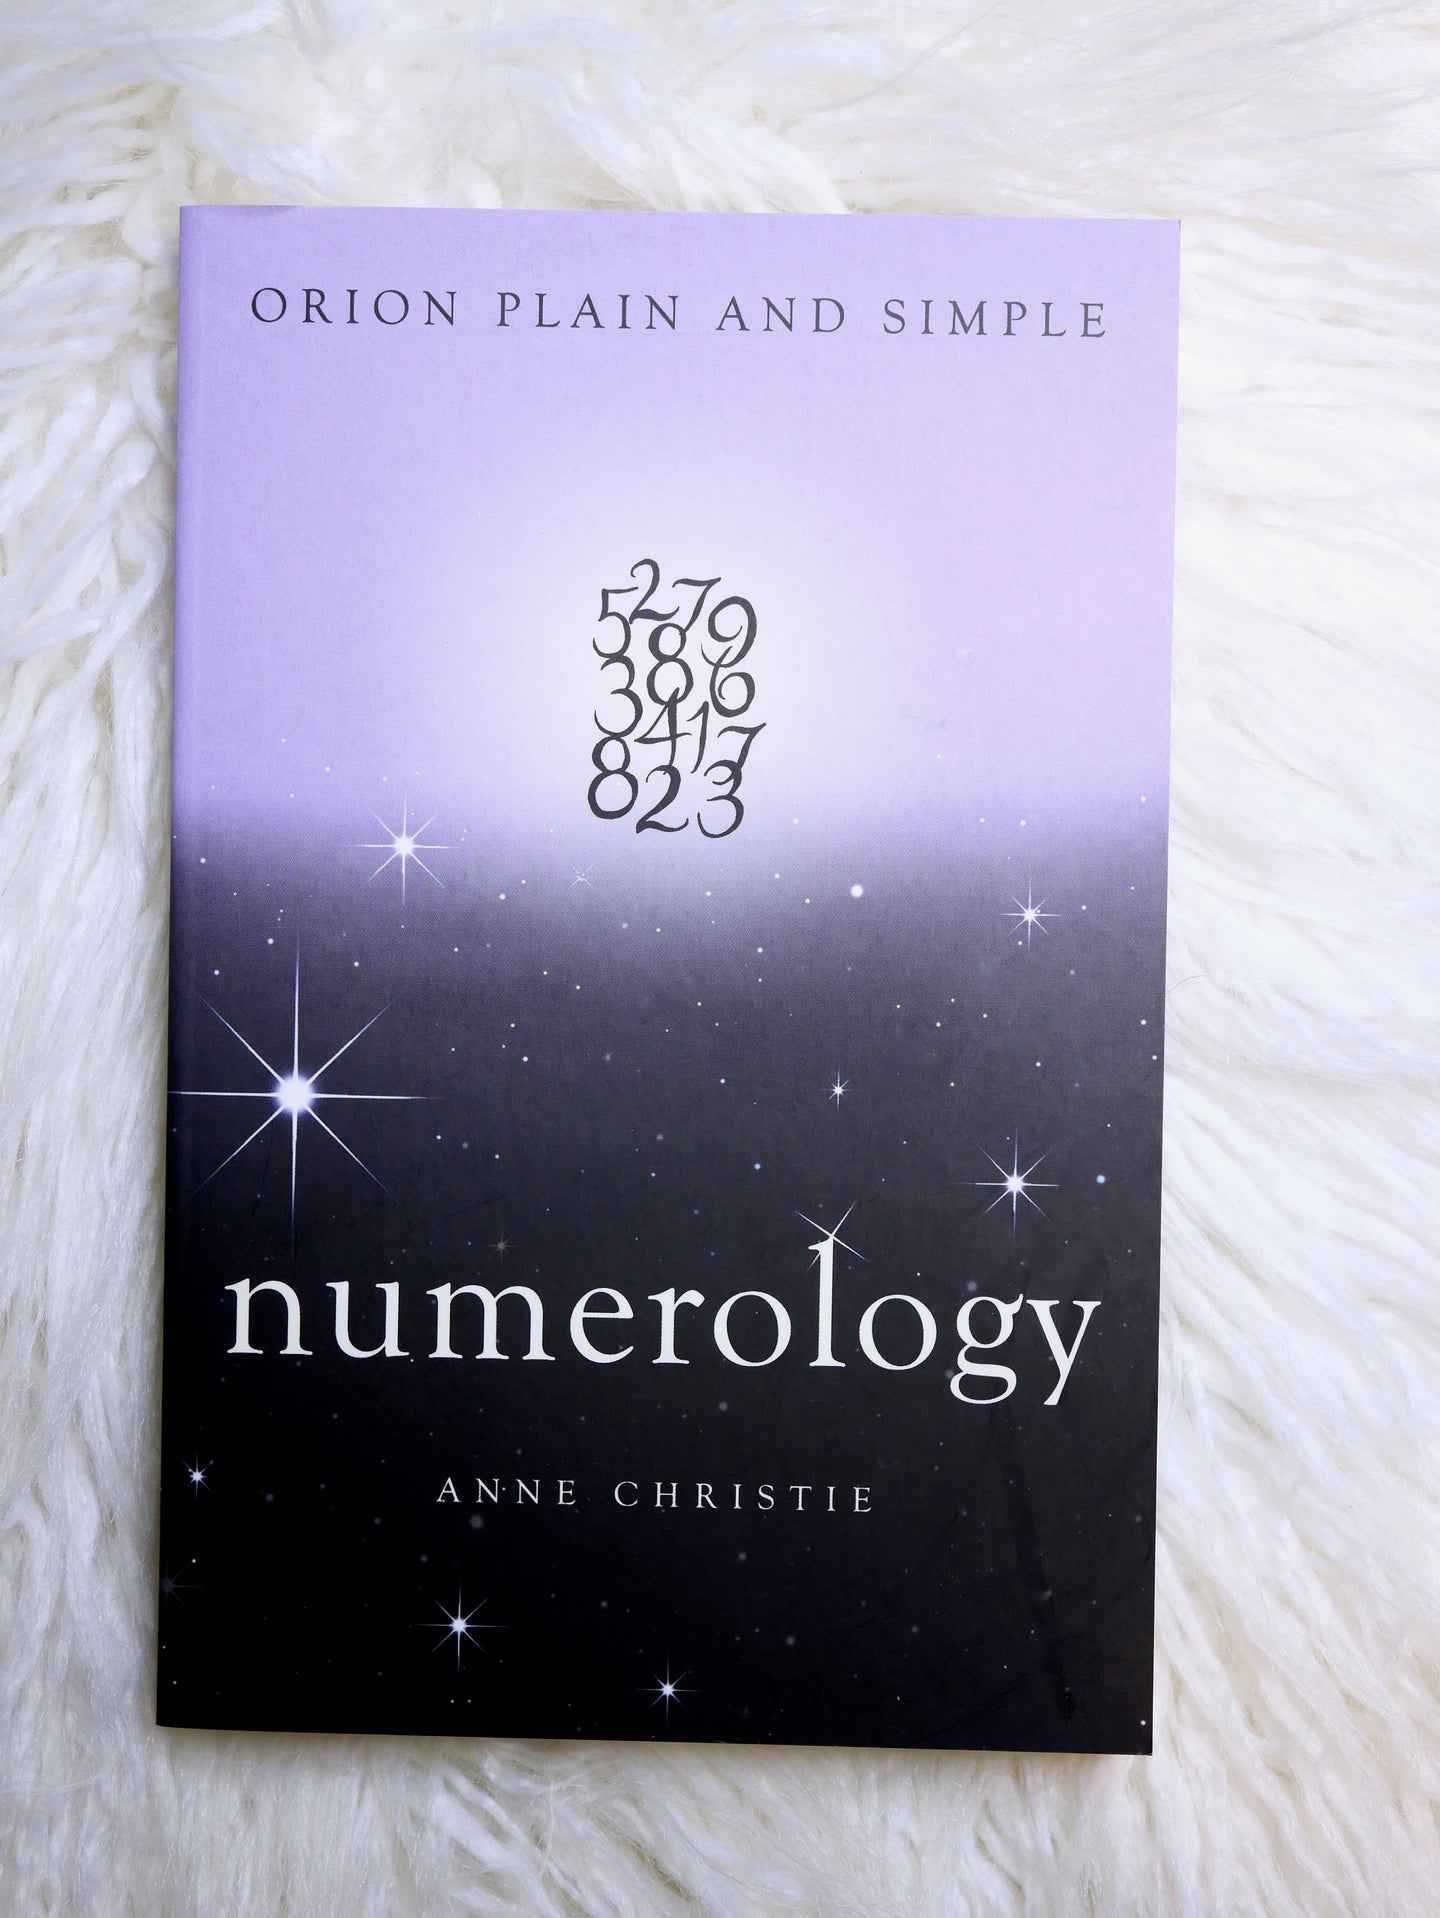 Numerology, Orion plain and simple